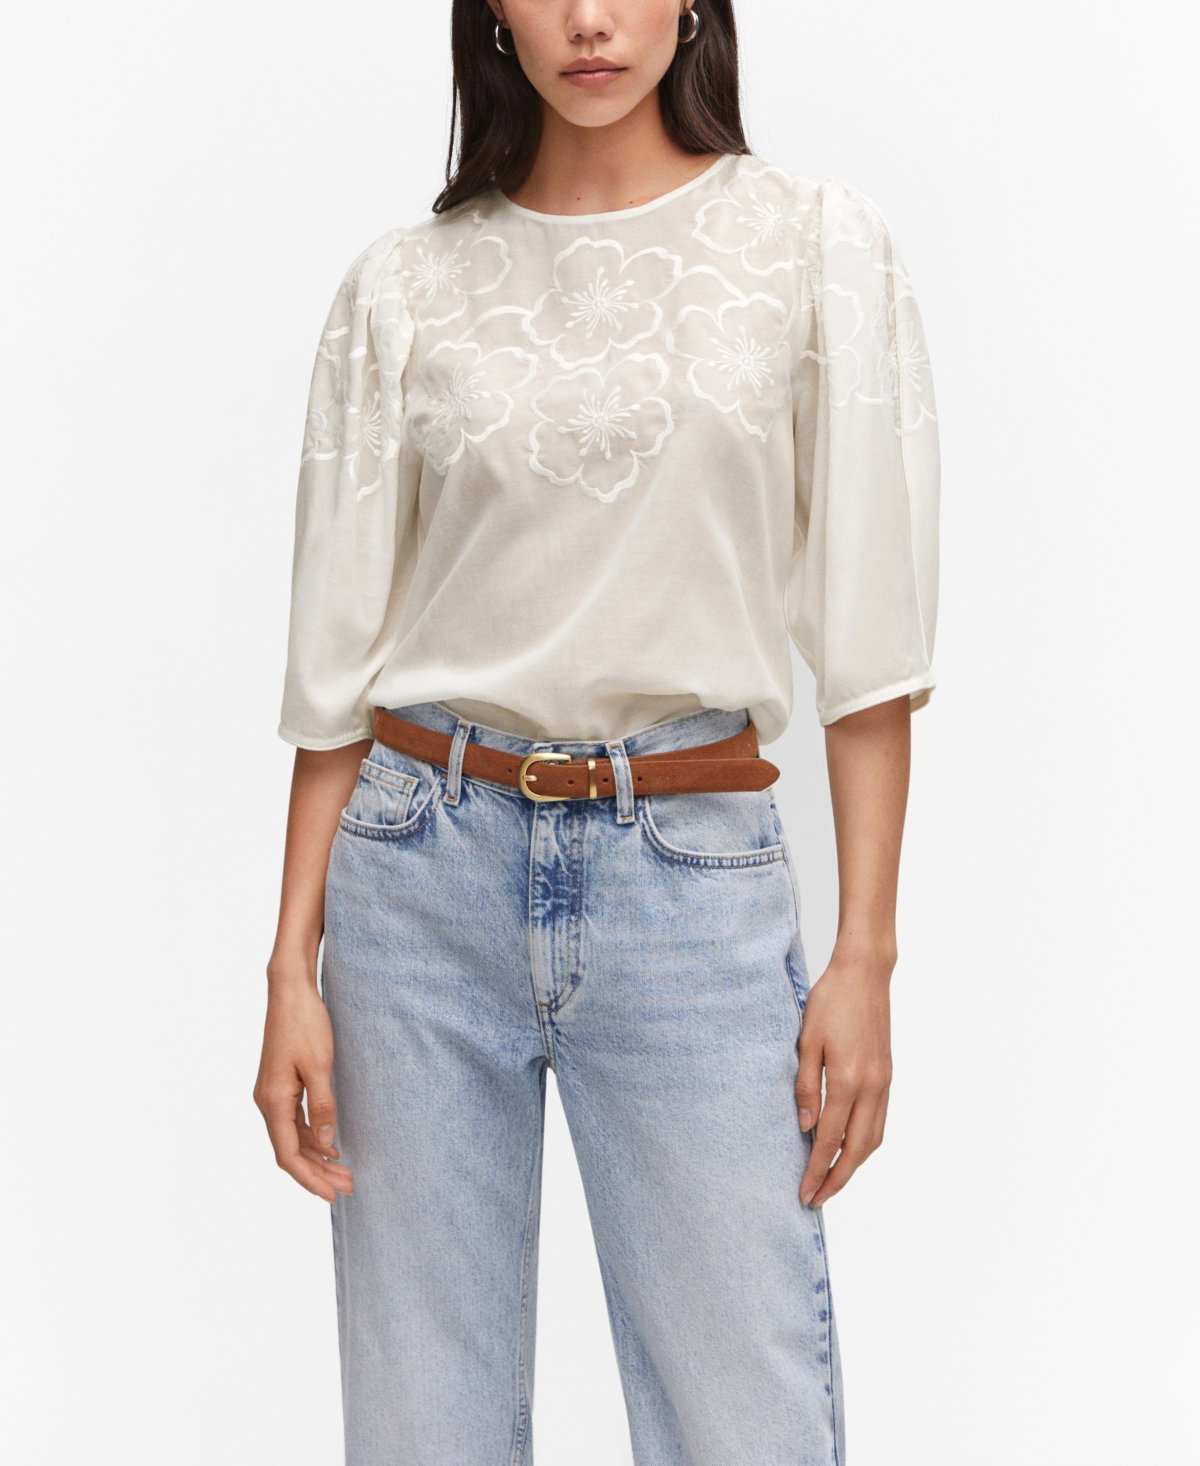 Women's Floral Embroidered Blouse - Off White